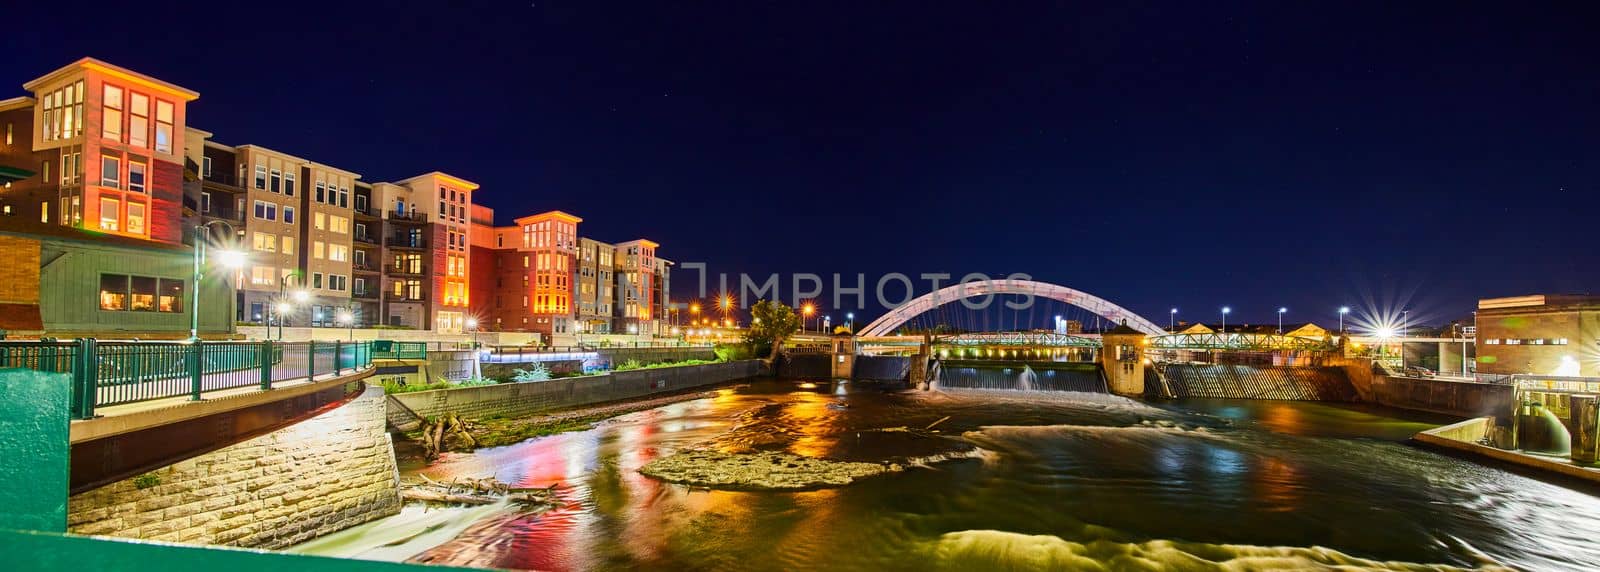 Image of Rochester New York at night of river and bridge